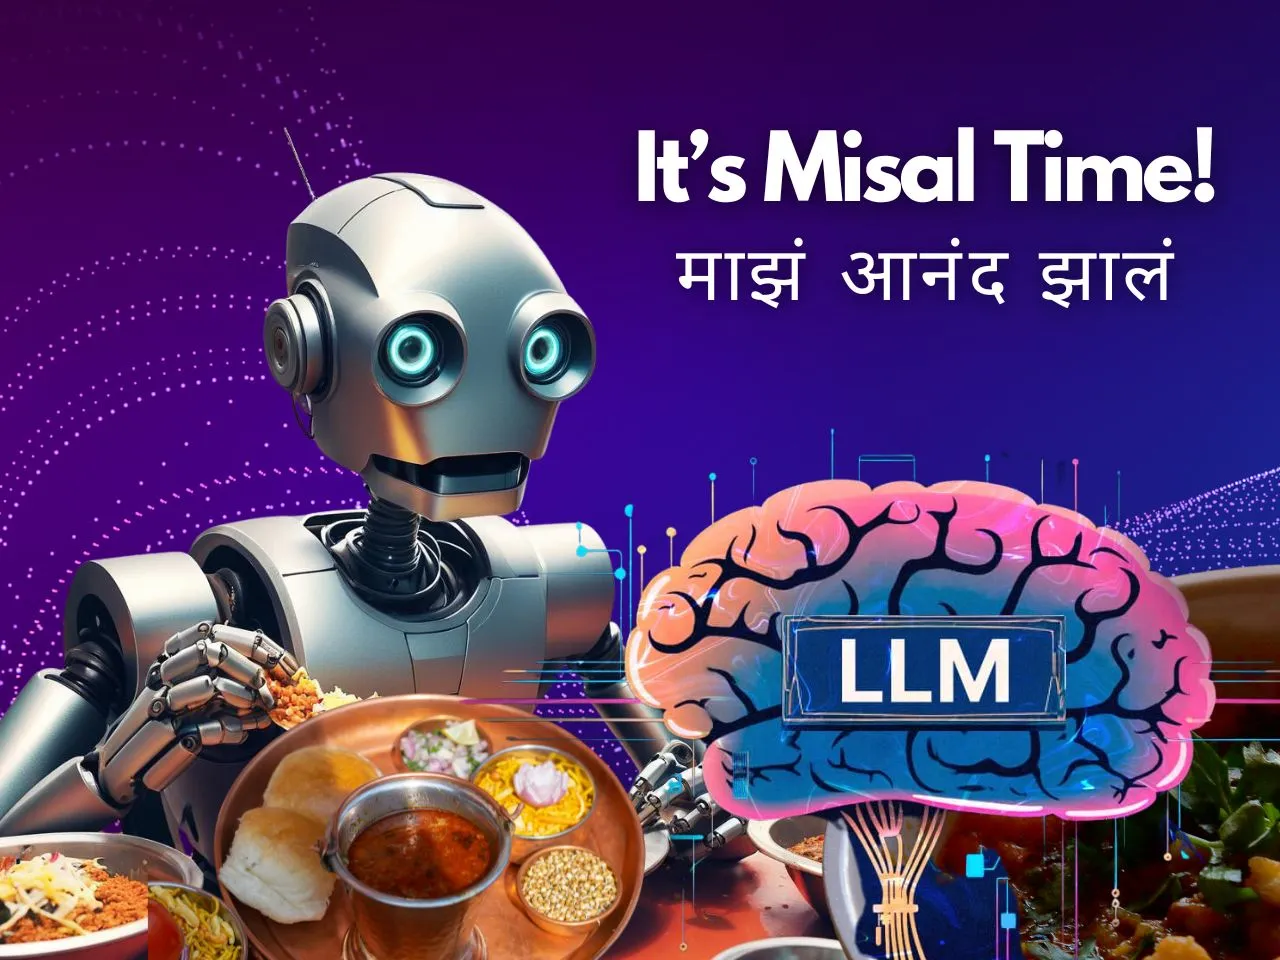 Misal Pav is Fine, but Do You Know What an AI Startup's Misal LLM is?